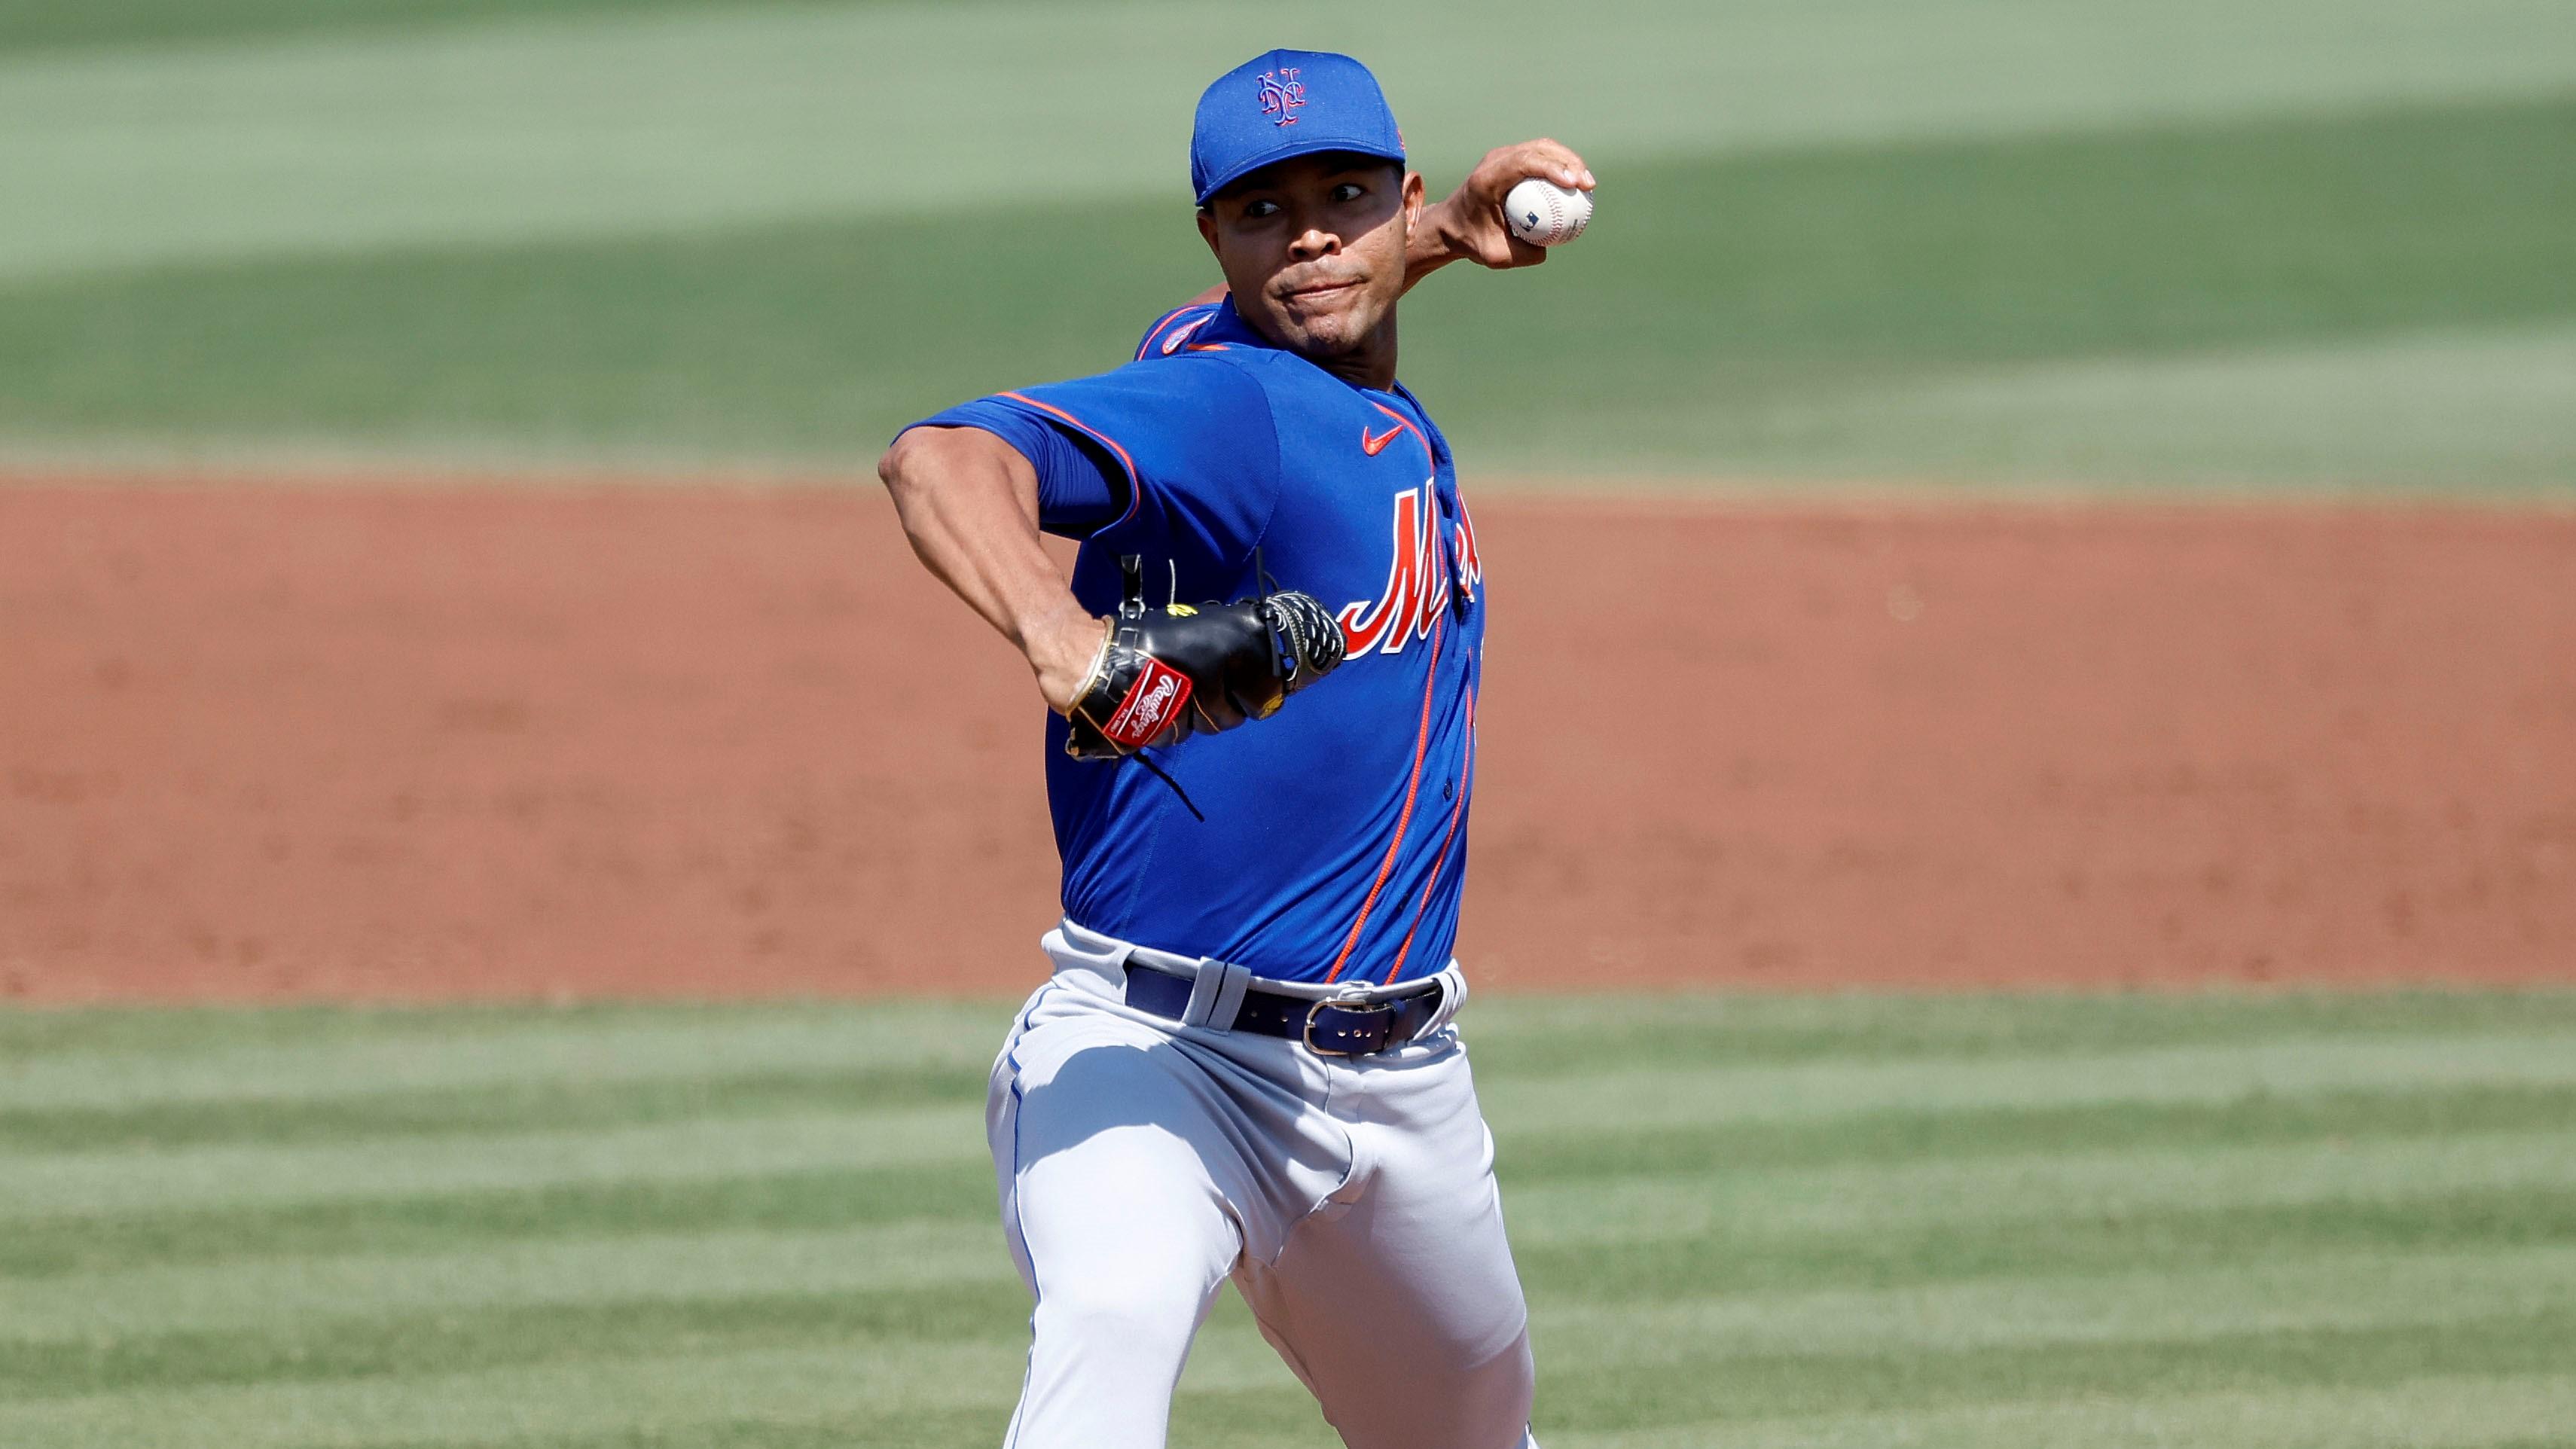 Mar 5, 2023; Jupiter, Florida, USA; New York Mets pitcher Jose Quintana (62) pitches against the St. Louis Cardinals in the third inning at Roger Dean Stadium. Mandatory Credit: Rhona Wise-USA TODAY Sports / © Rhona Wise-USA TODAY Sports